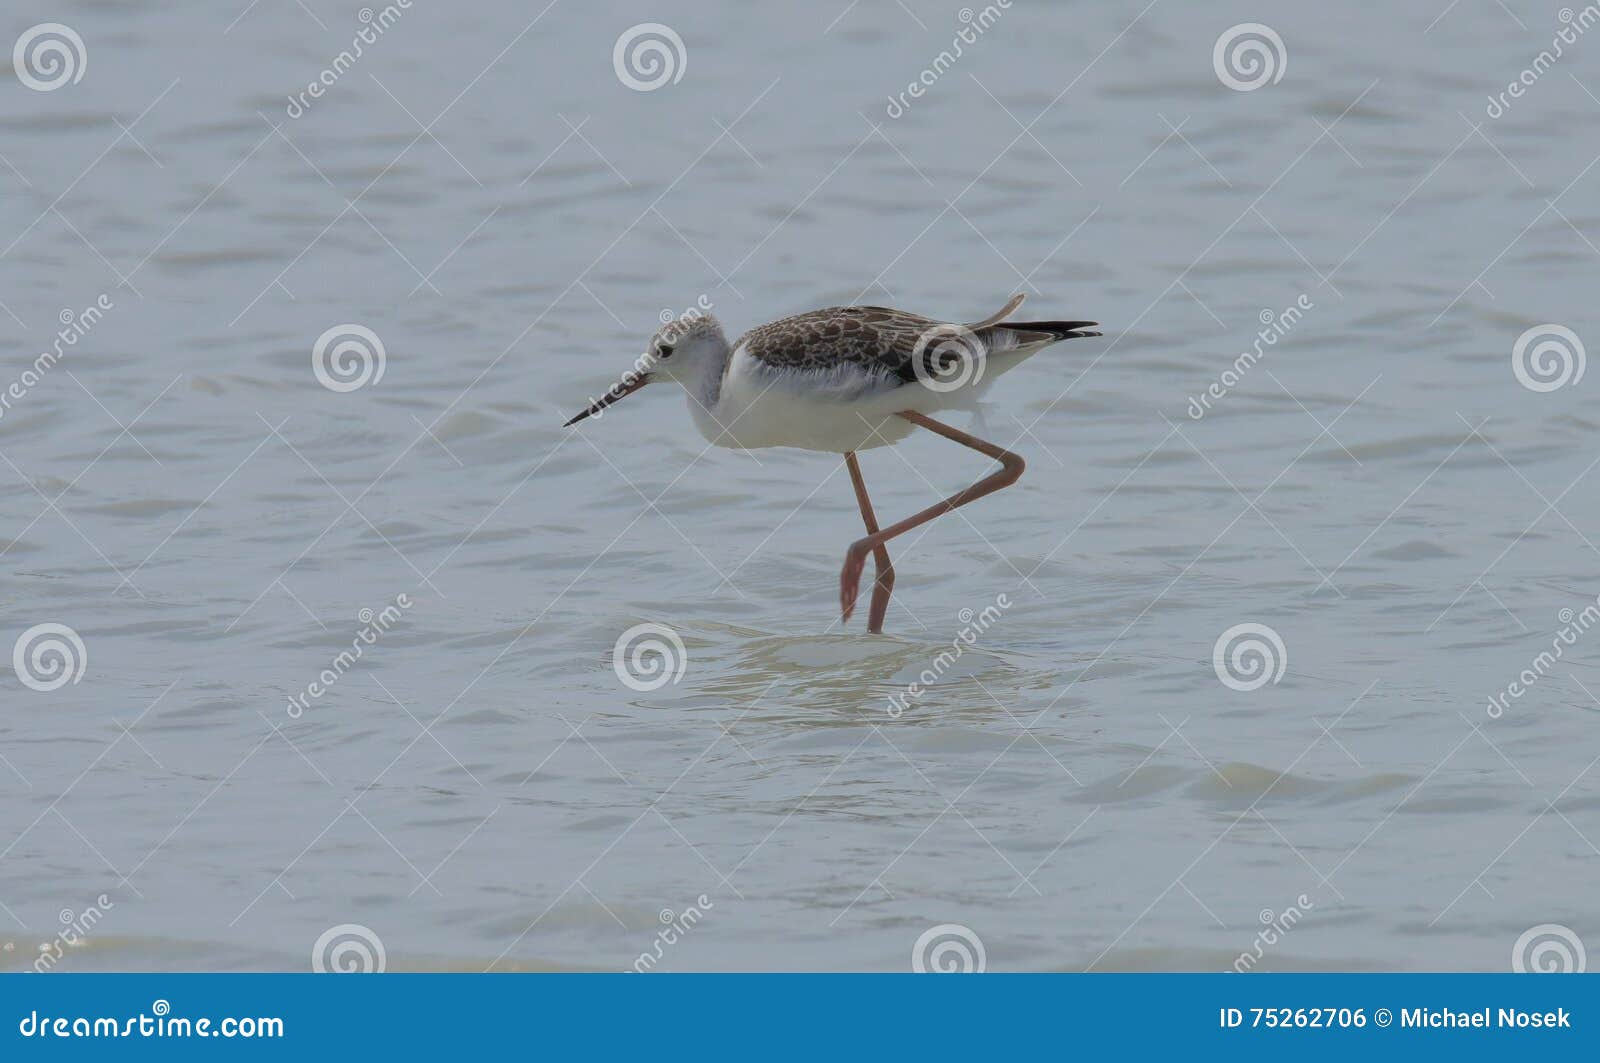 Small Bird with Slim Legs in Sea Stock Photo - Image of background ...